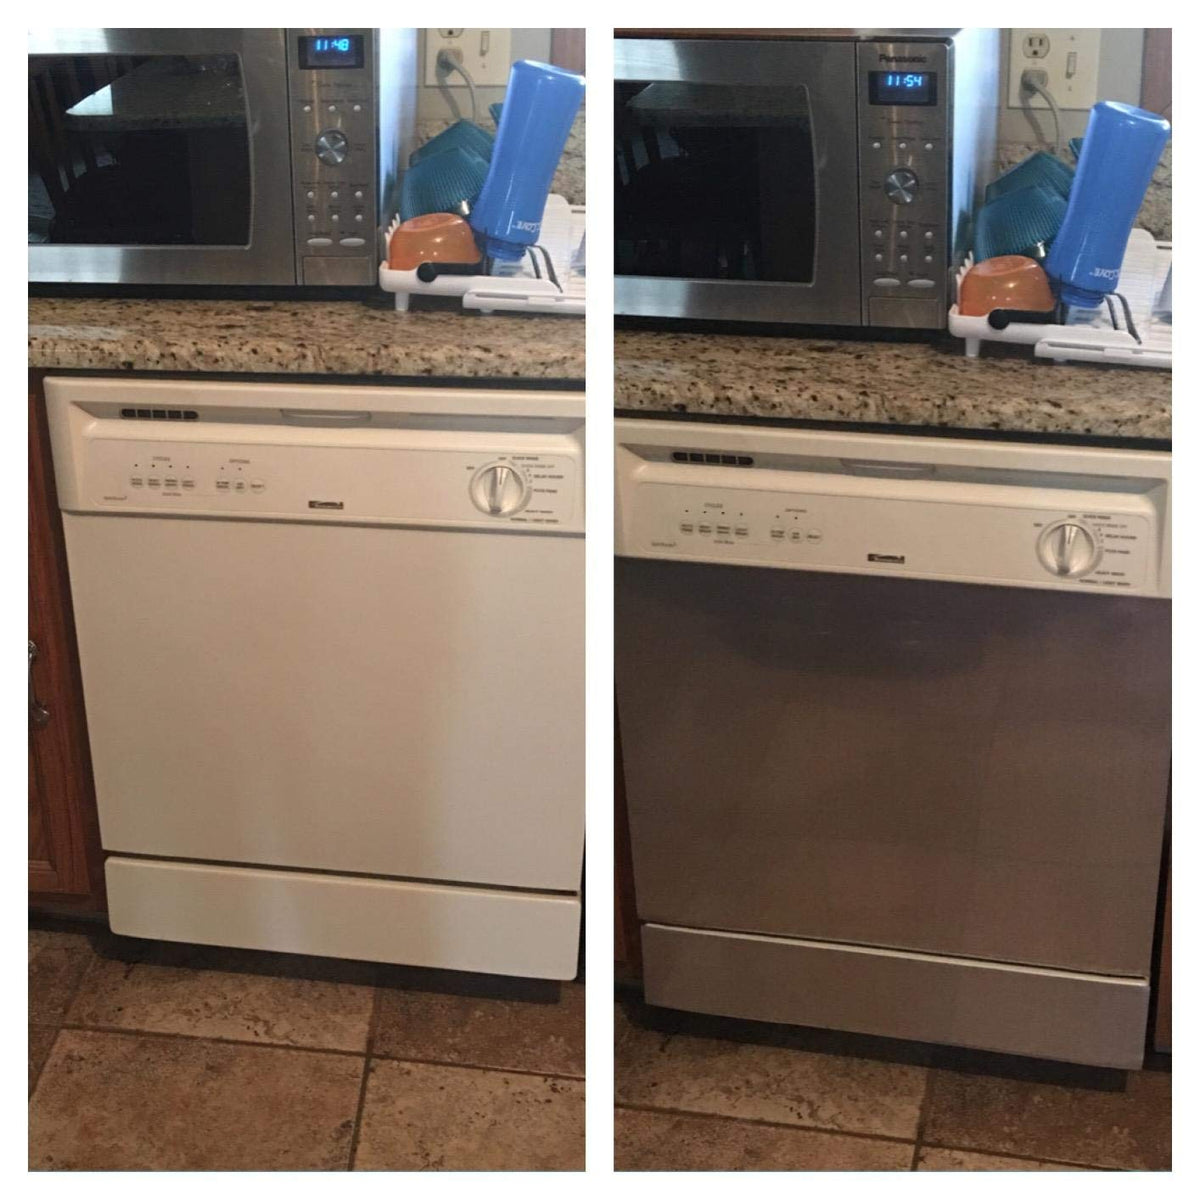 Instant Stainless® Magnetic Dishwasher Cover